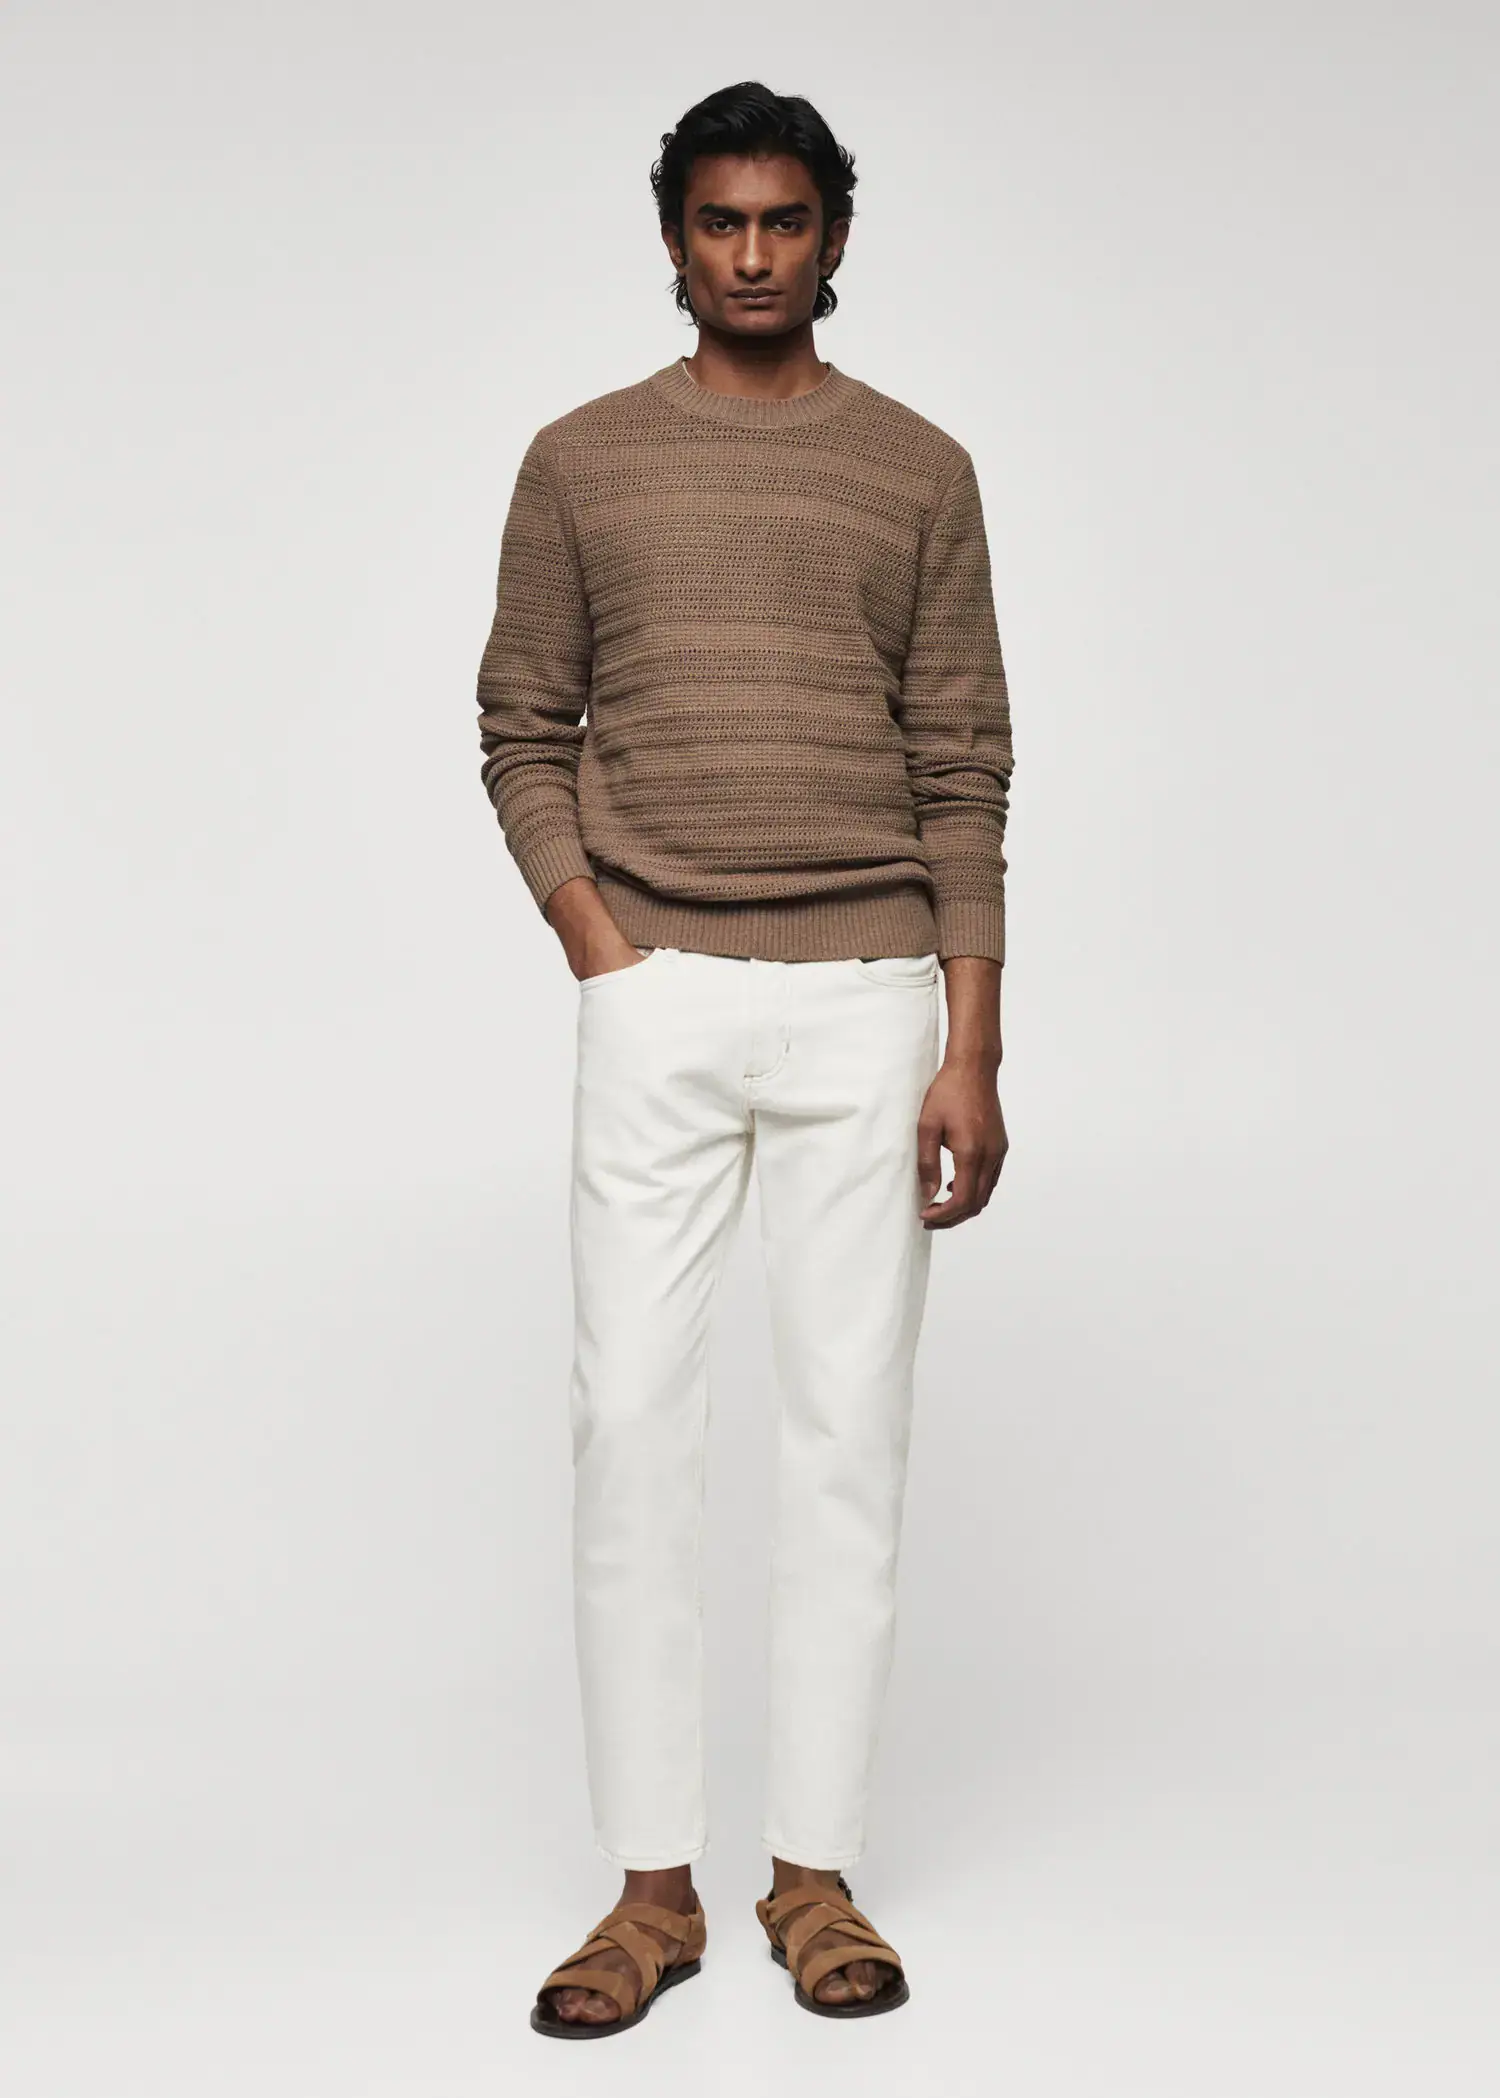 Mango Openwork cotton sweater. a man wearing a brown sweater and white pants. 